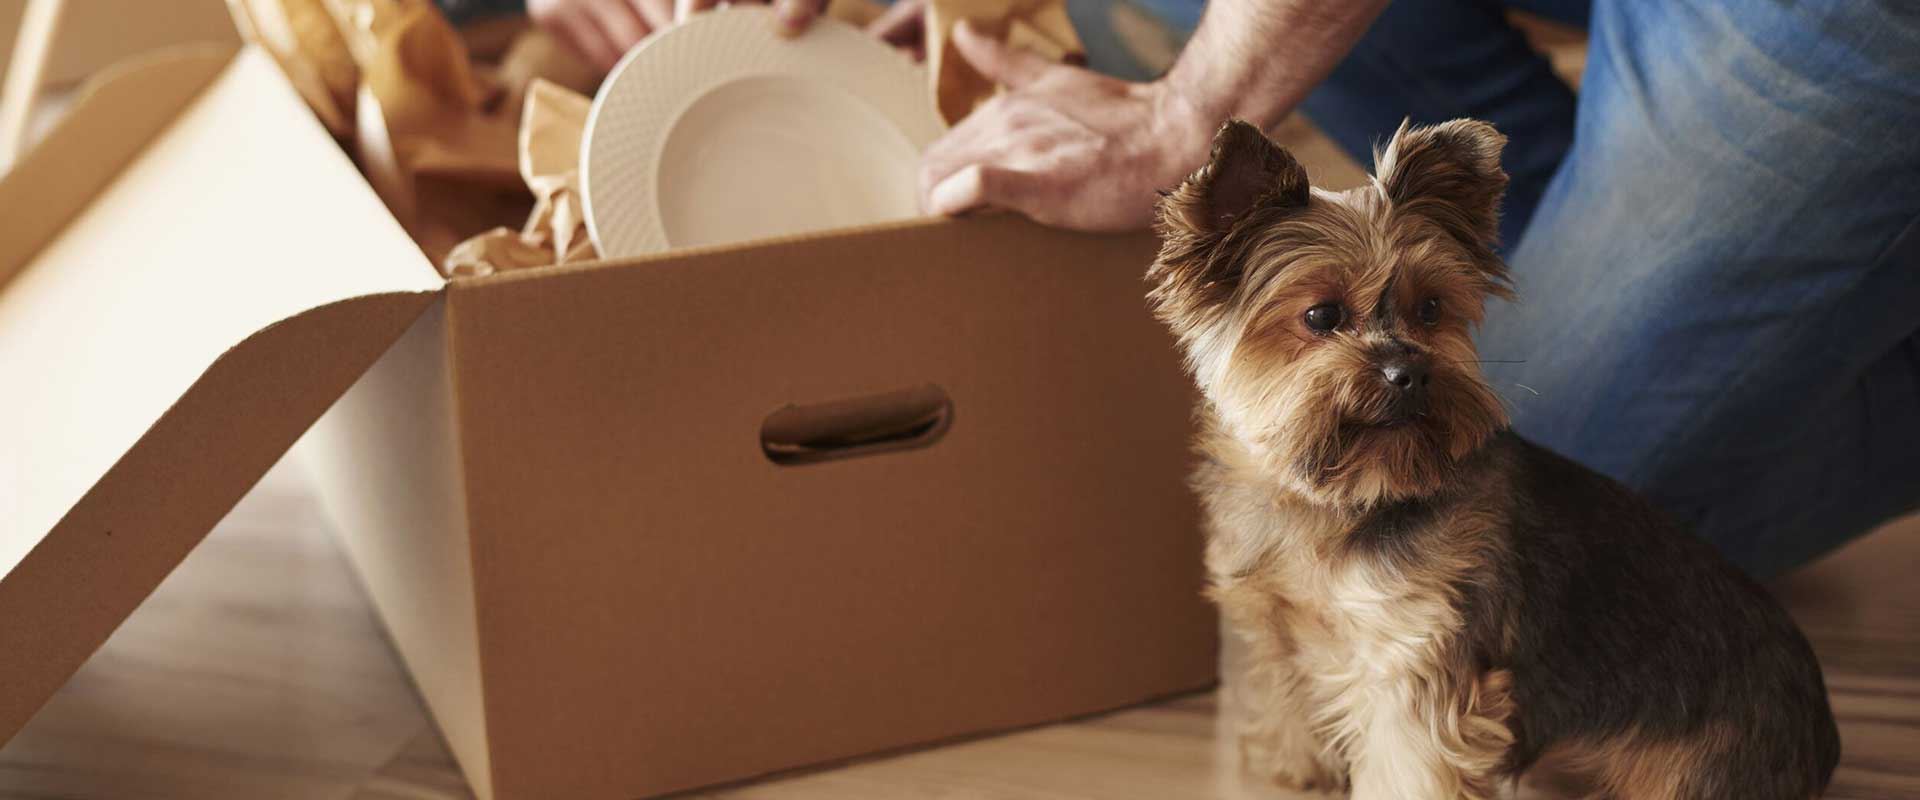 Man unpacking boxes with small dog